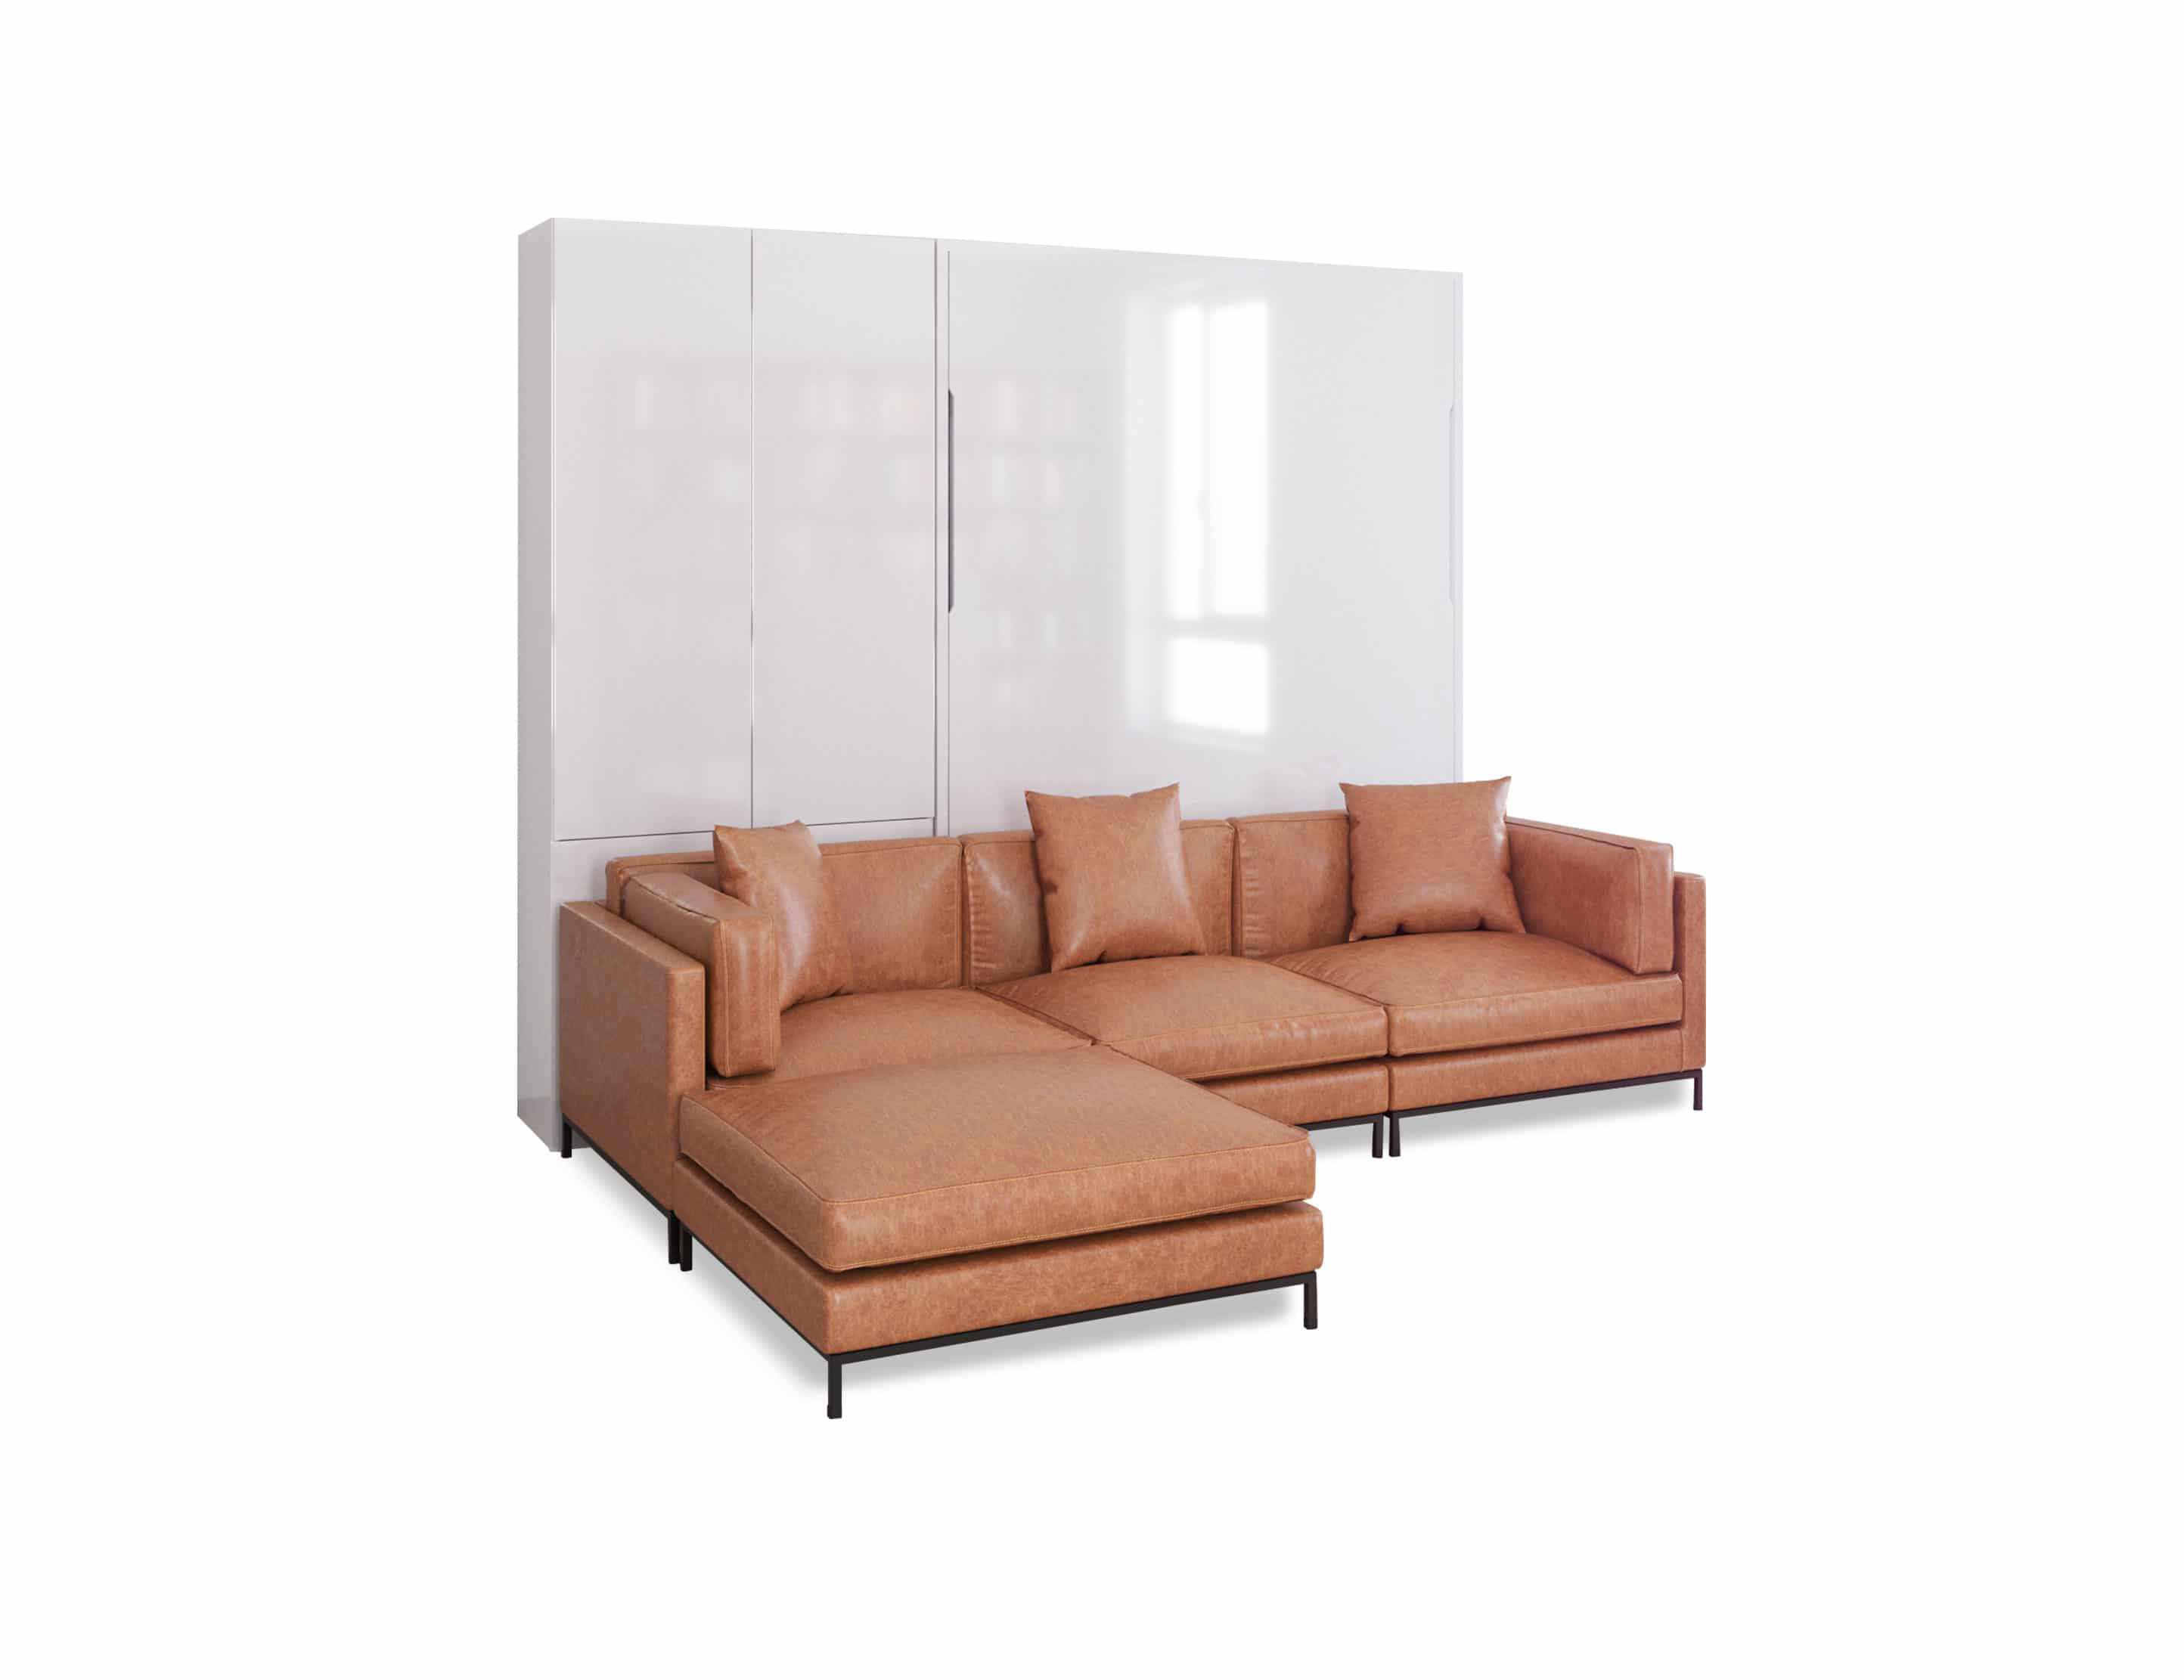 Leather Sectional Wall Bed Sofa